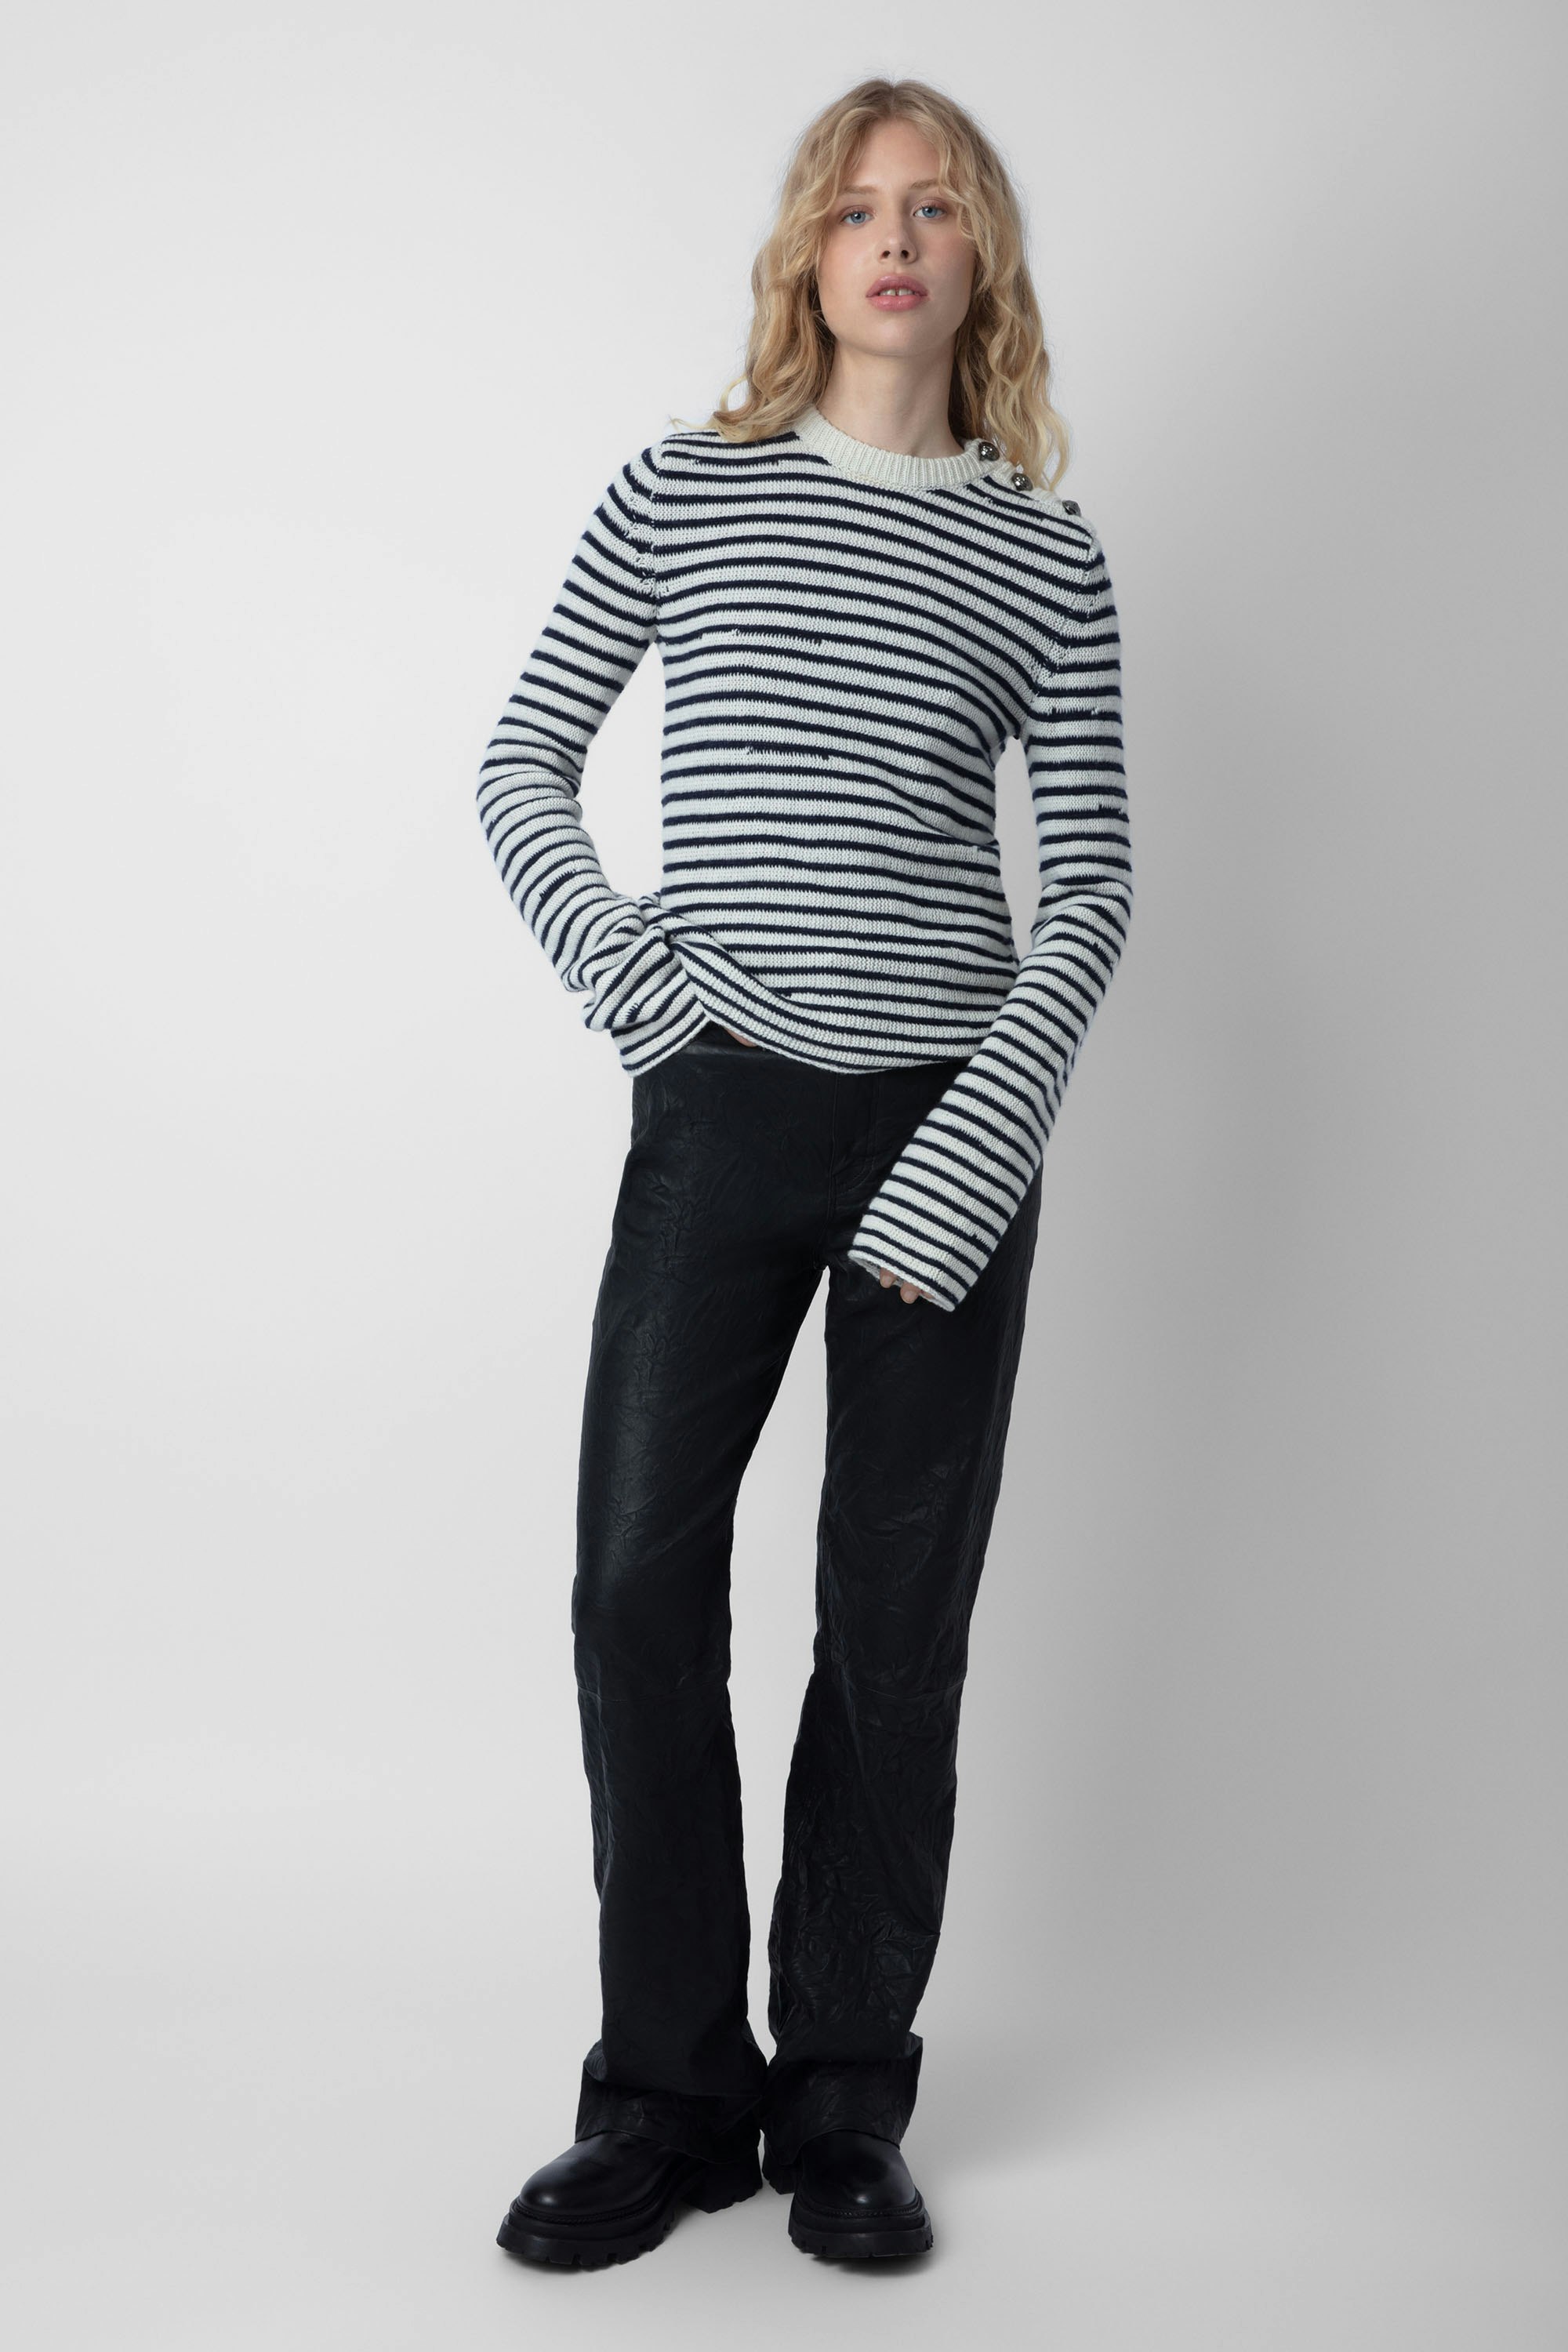 Jade Sweater - Women's striped ecru wool and cashmere sweater with buttons.